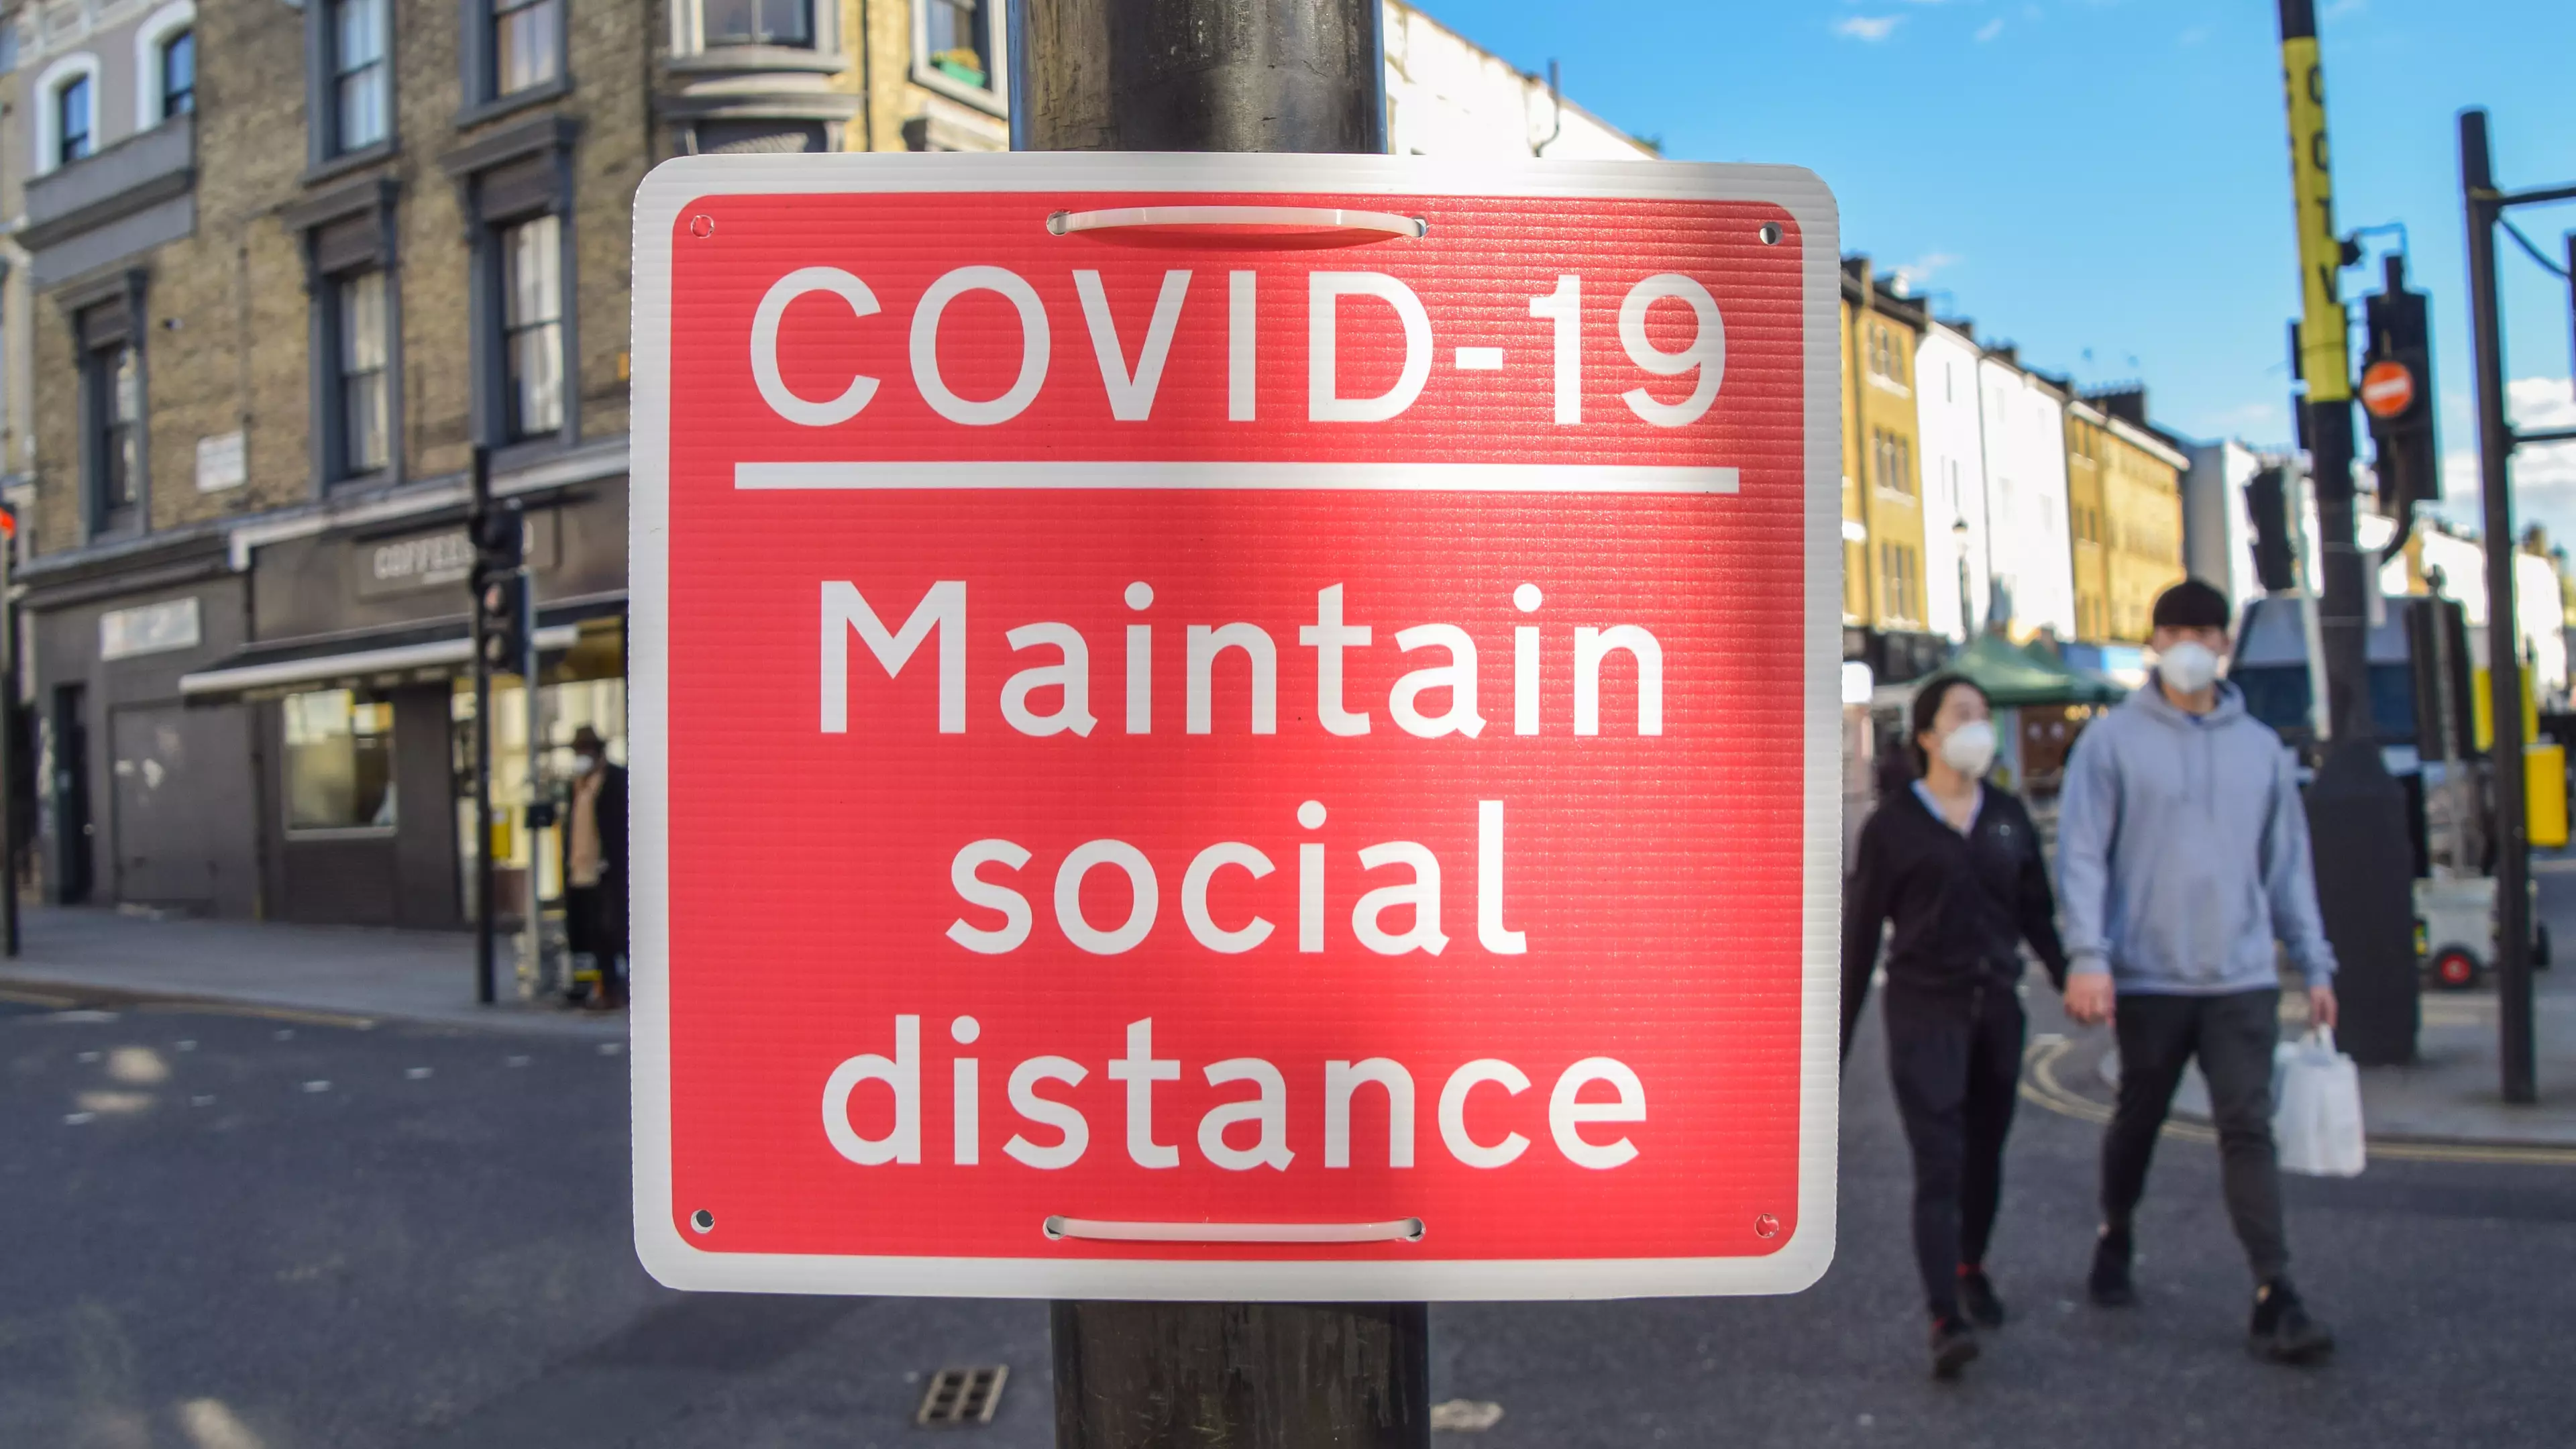 Scientists Urge UK Government To End All Covid-19 Measures 'No Later' Than 21 June